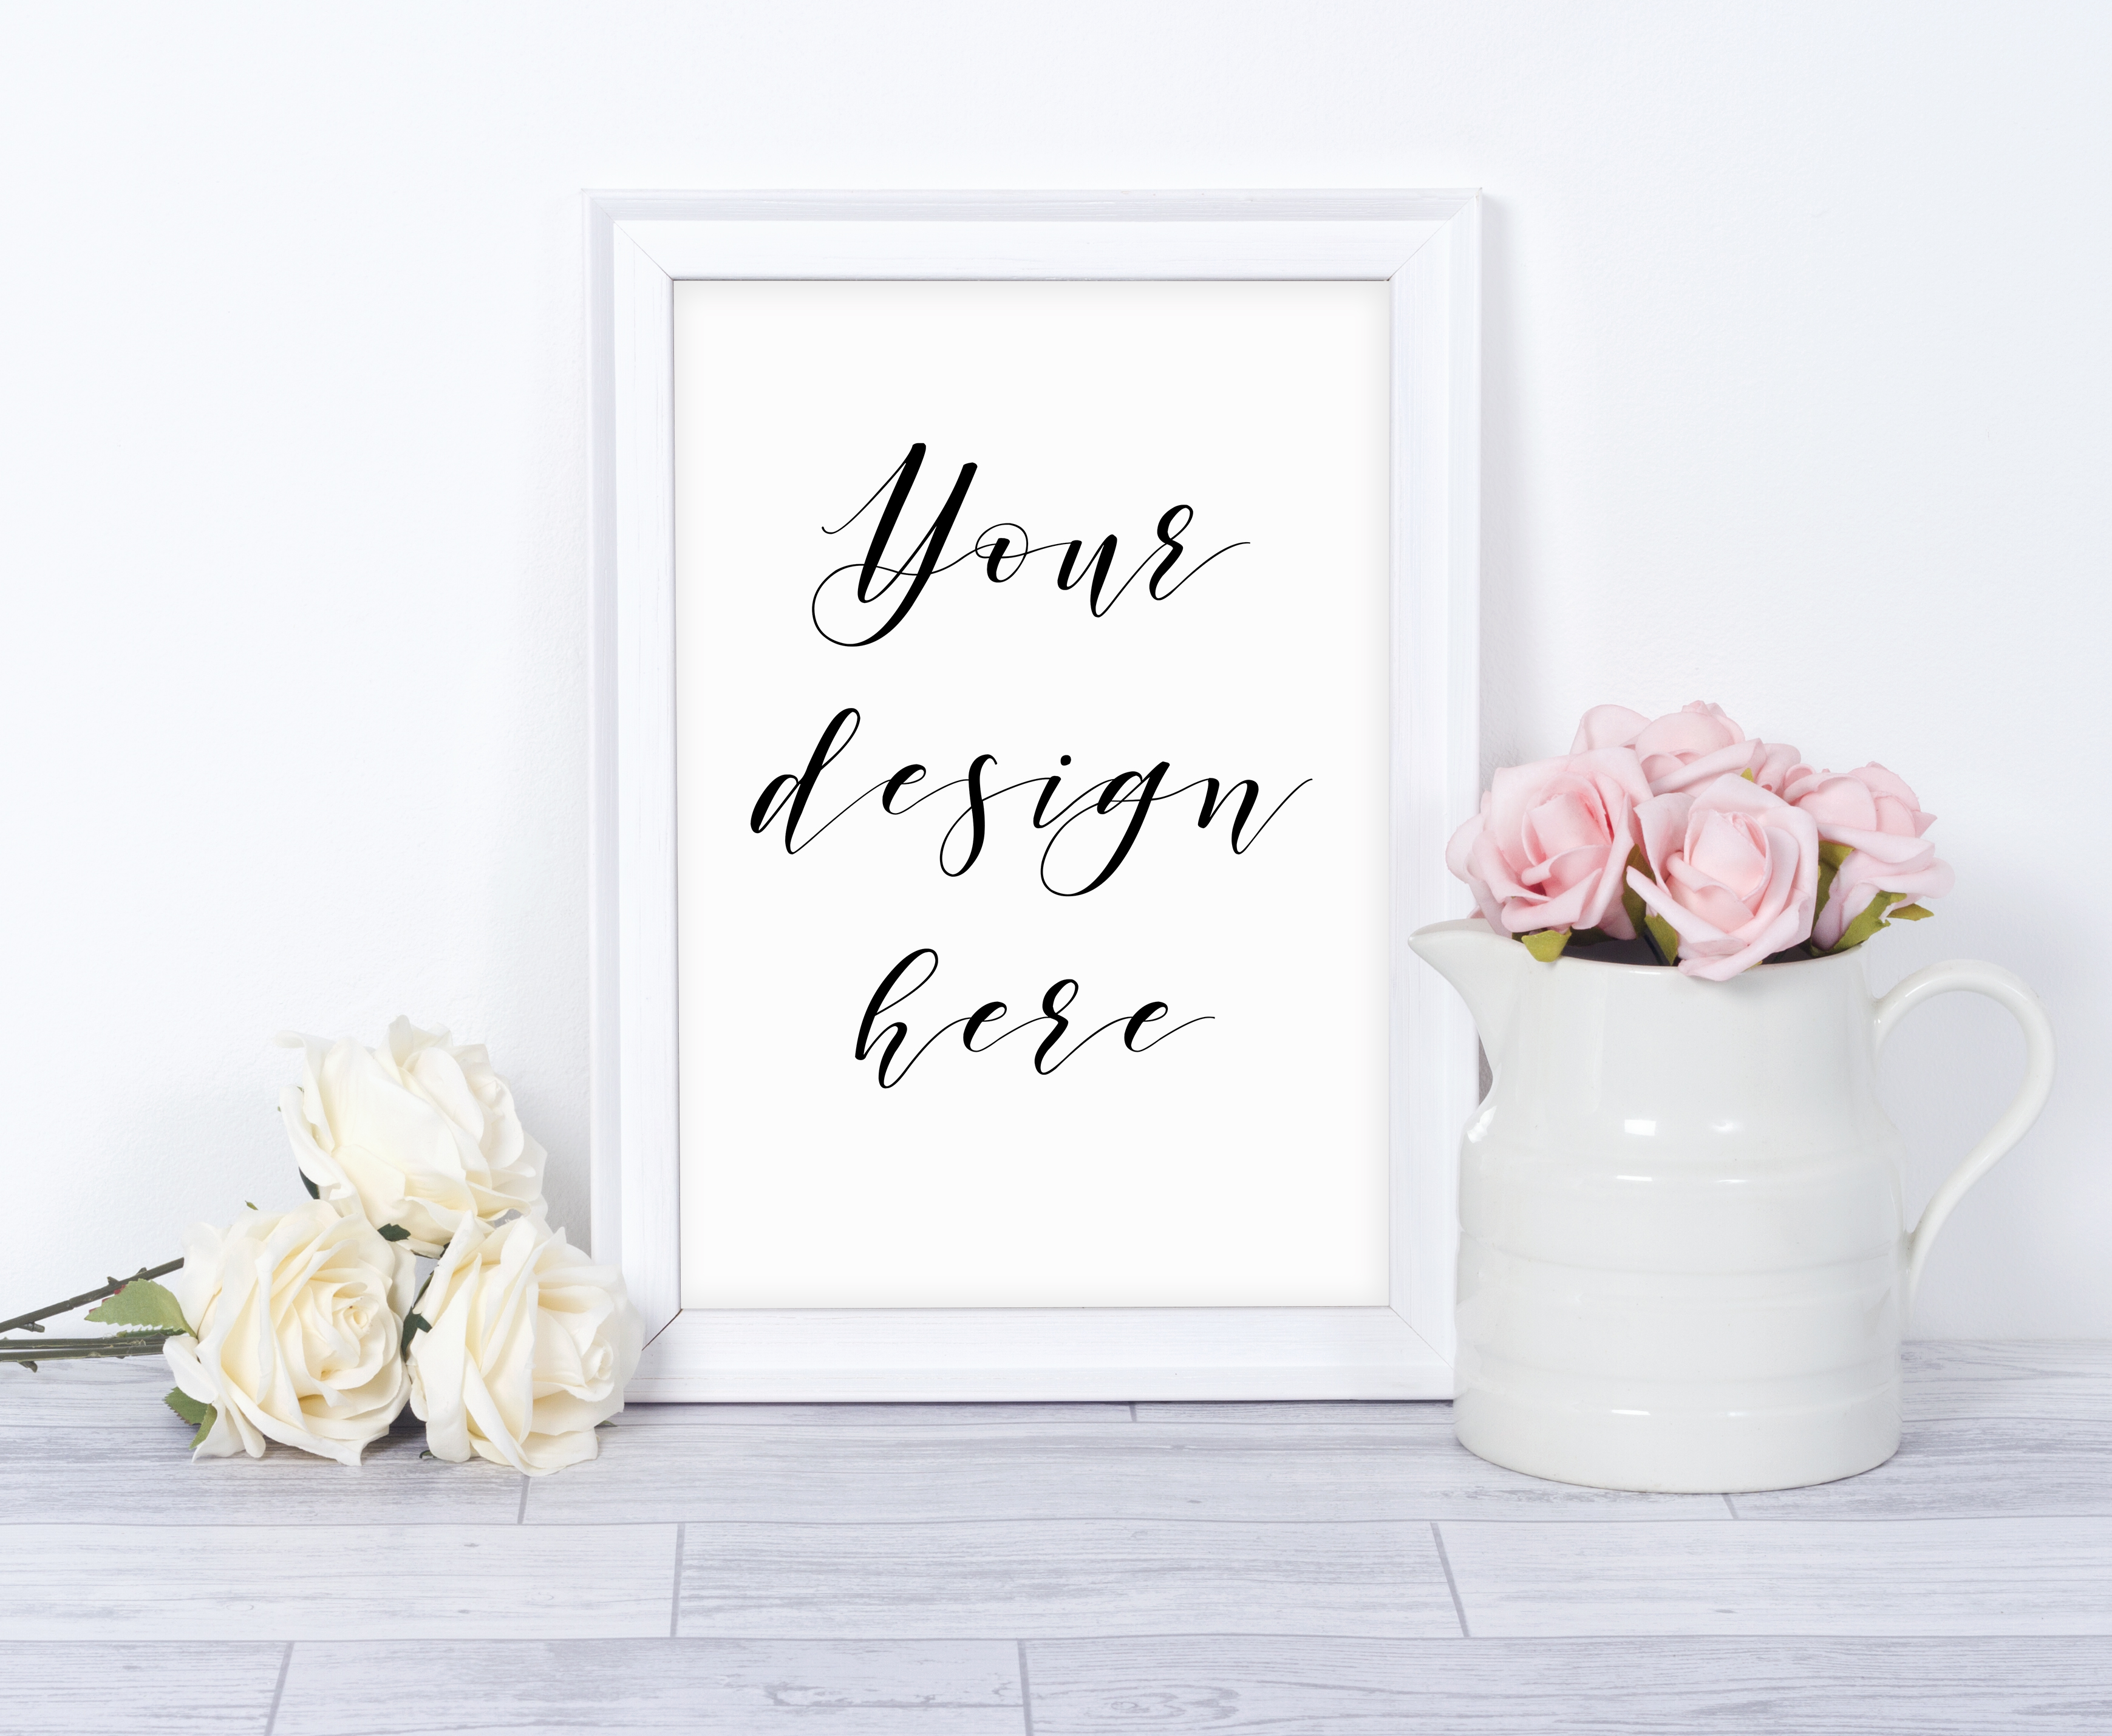 White A4 Frame Mockup With Roses